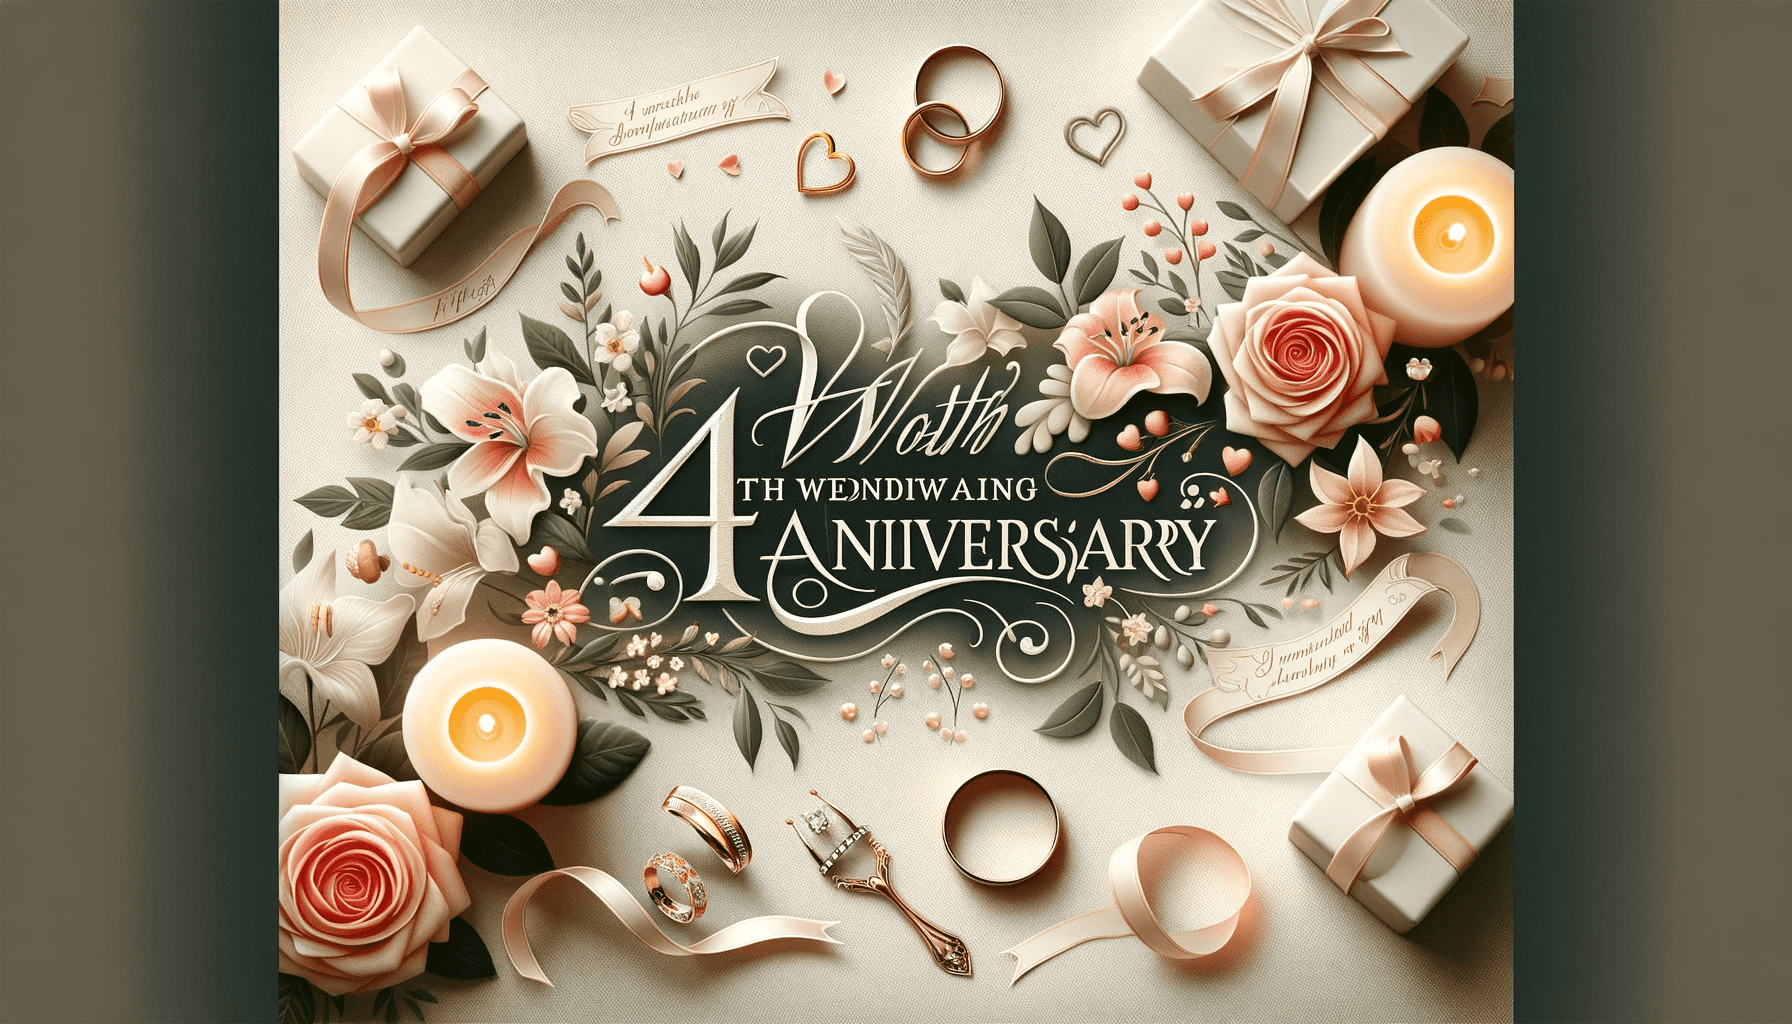 A creative and appealing featured image for an article on 4th wedding anniversary quotes, captions, and wishes.